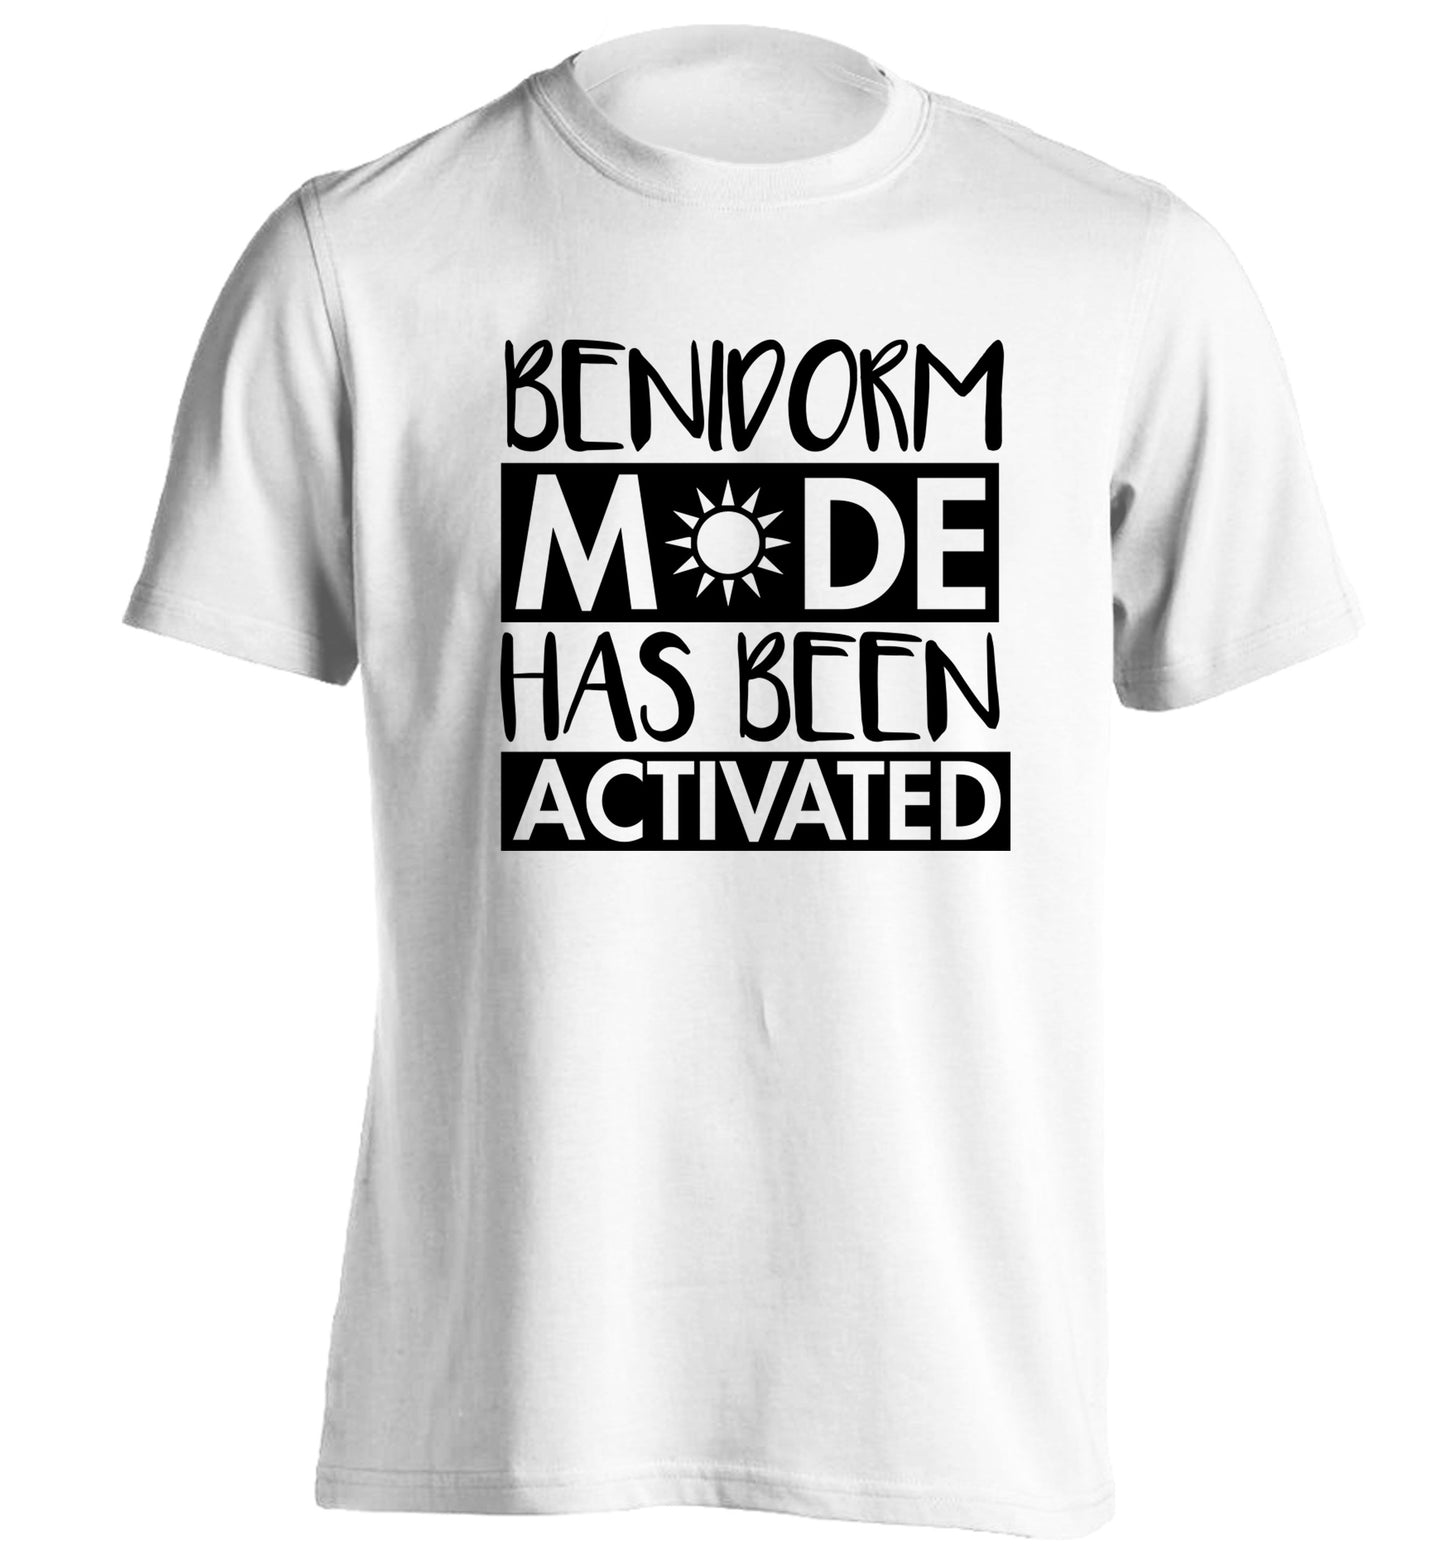 Benidorm mode has been activated adults unisex white Tshirt 2XL